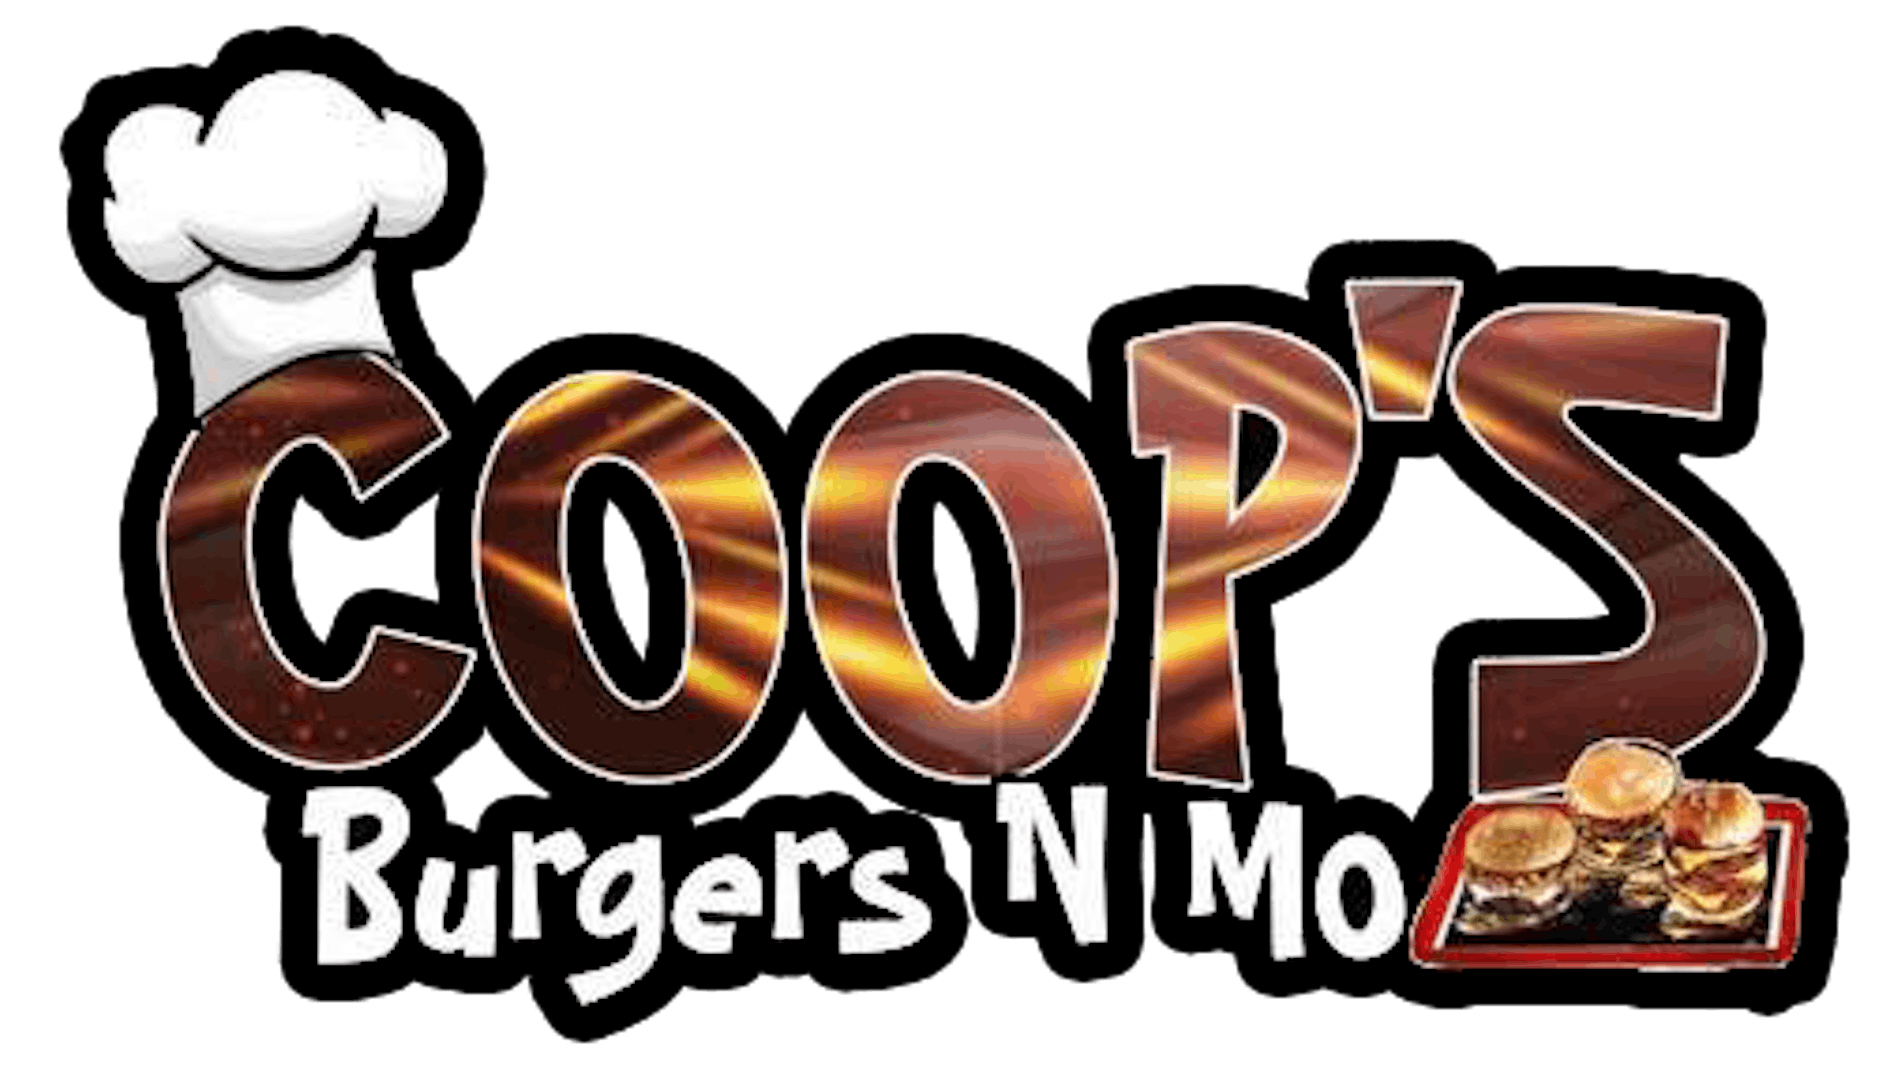 Coop's Burger's and Mo